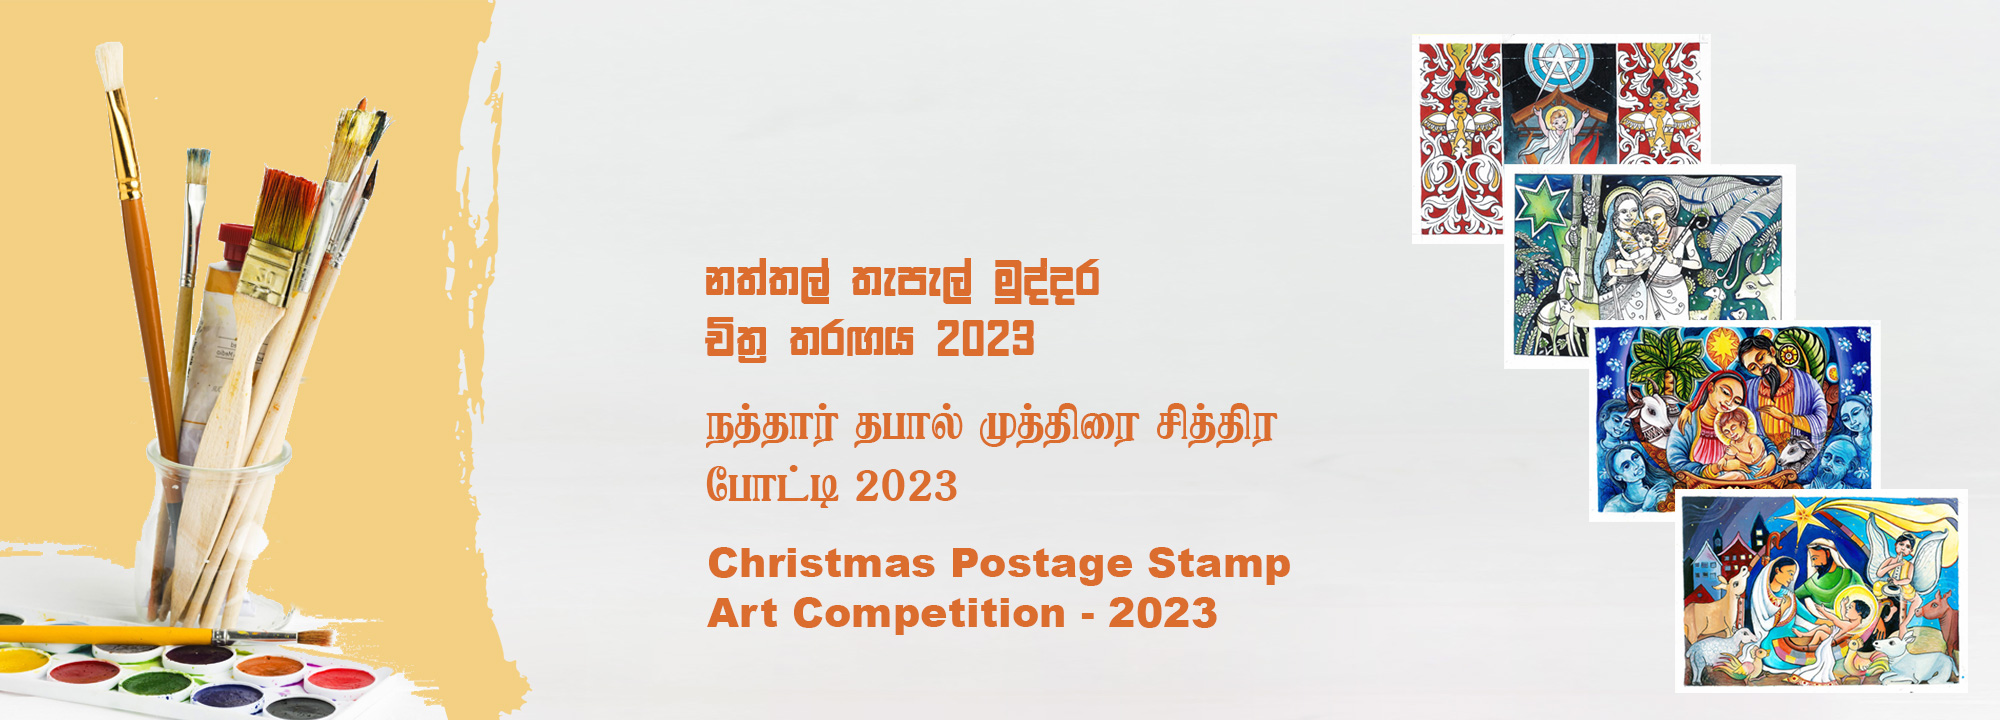 art-competition-2023